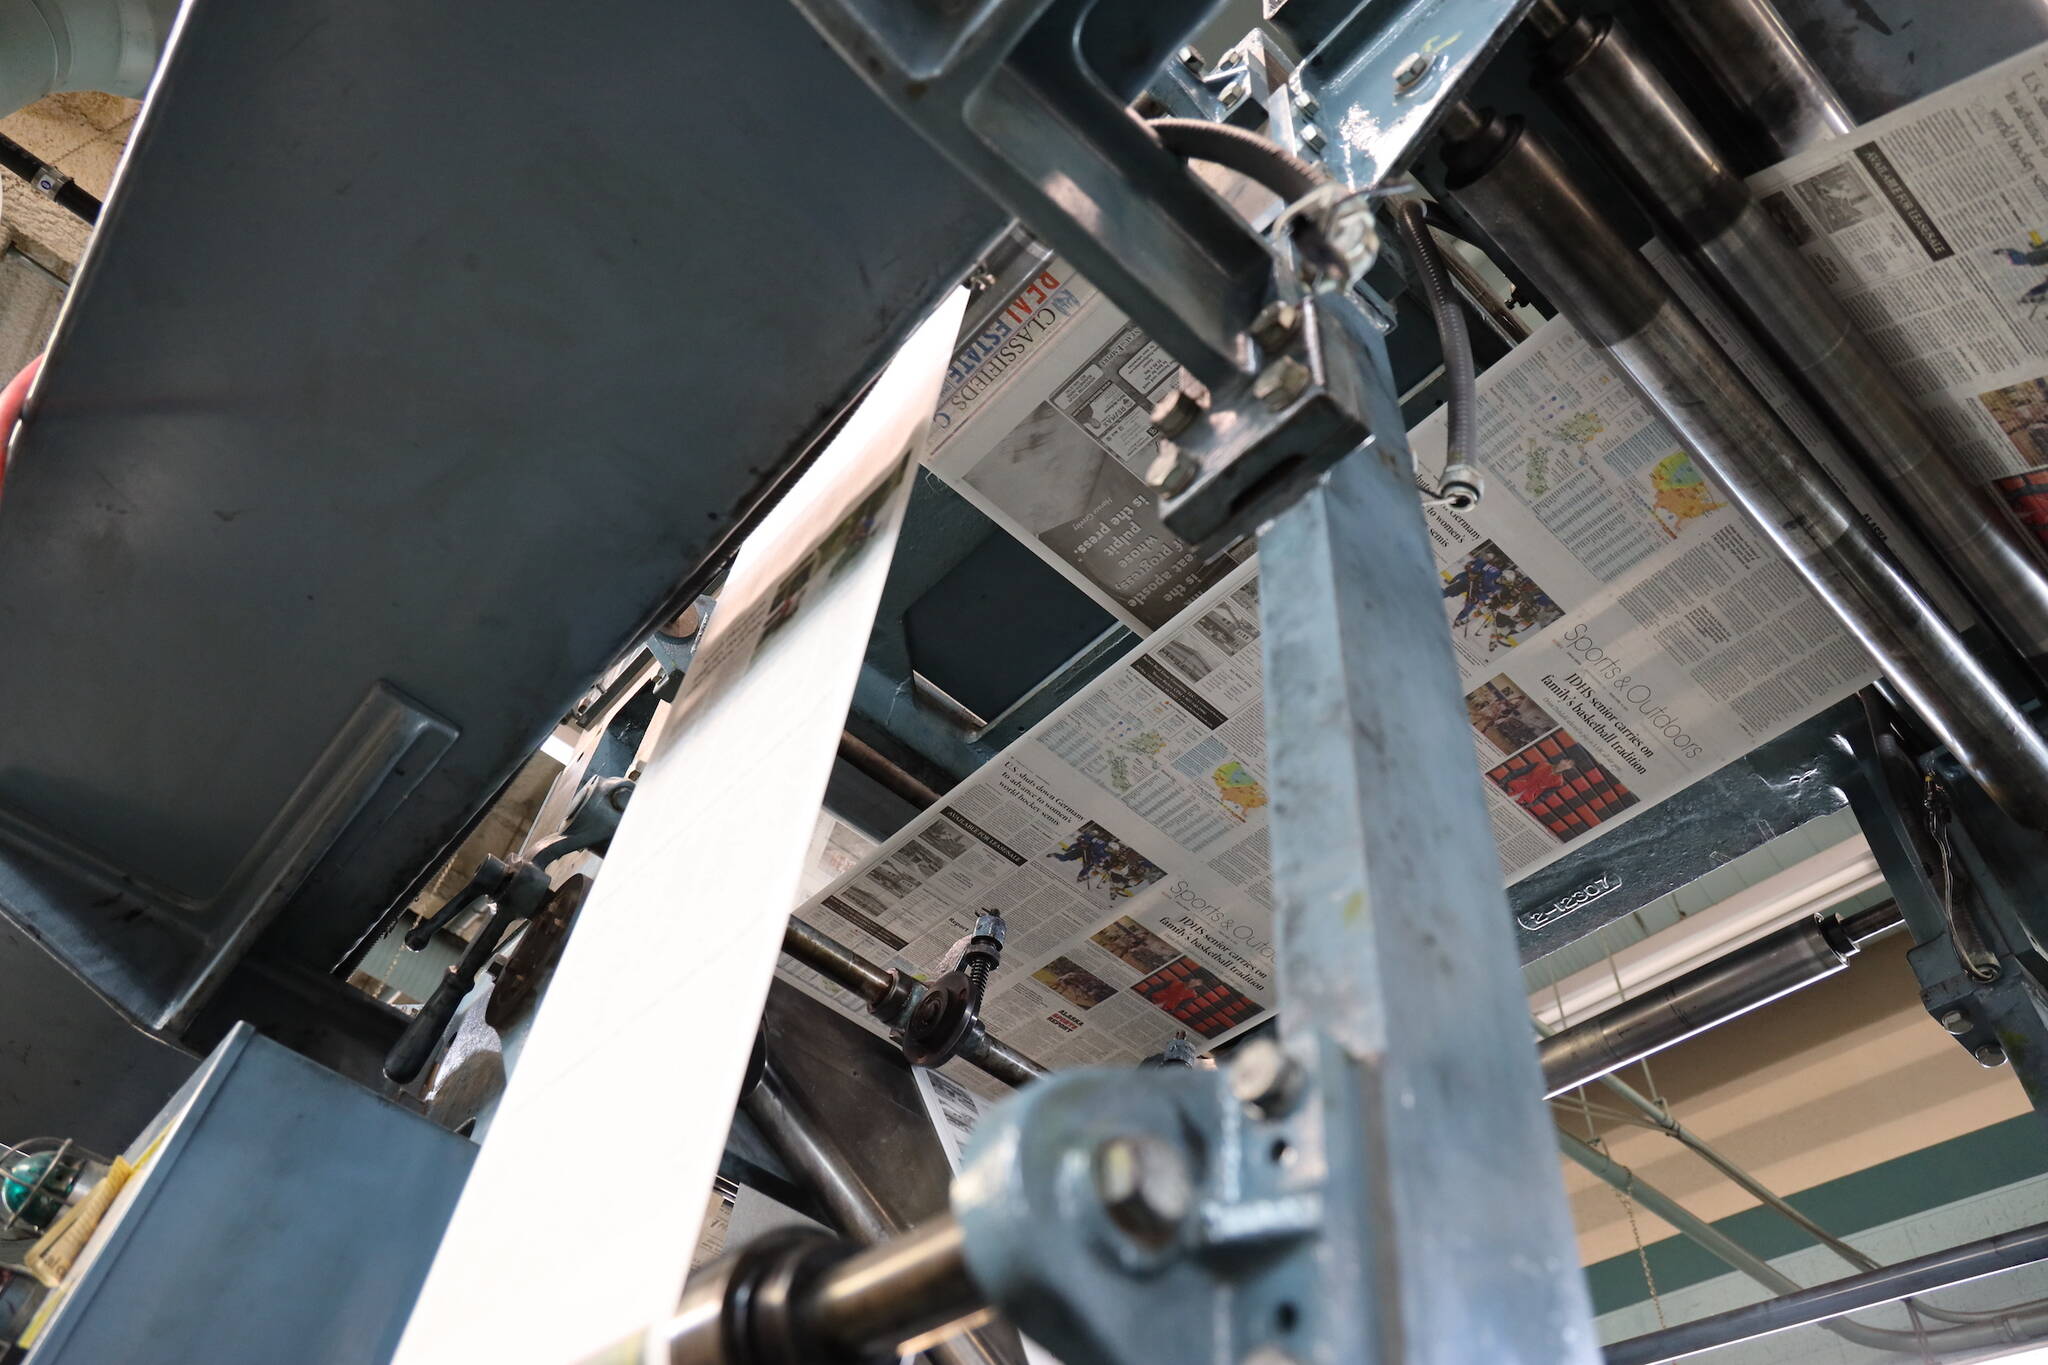 Freshly printed paper makes it way through the Juneau Empire printing press Thursday evening. Beginning May 3, the Juneau Empire will be printed in Washington state, and delivered on Wednesdays and Saturdays. (Clarise Larson / Juneau Empire)